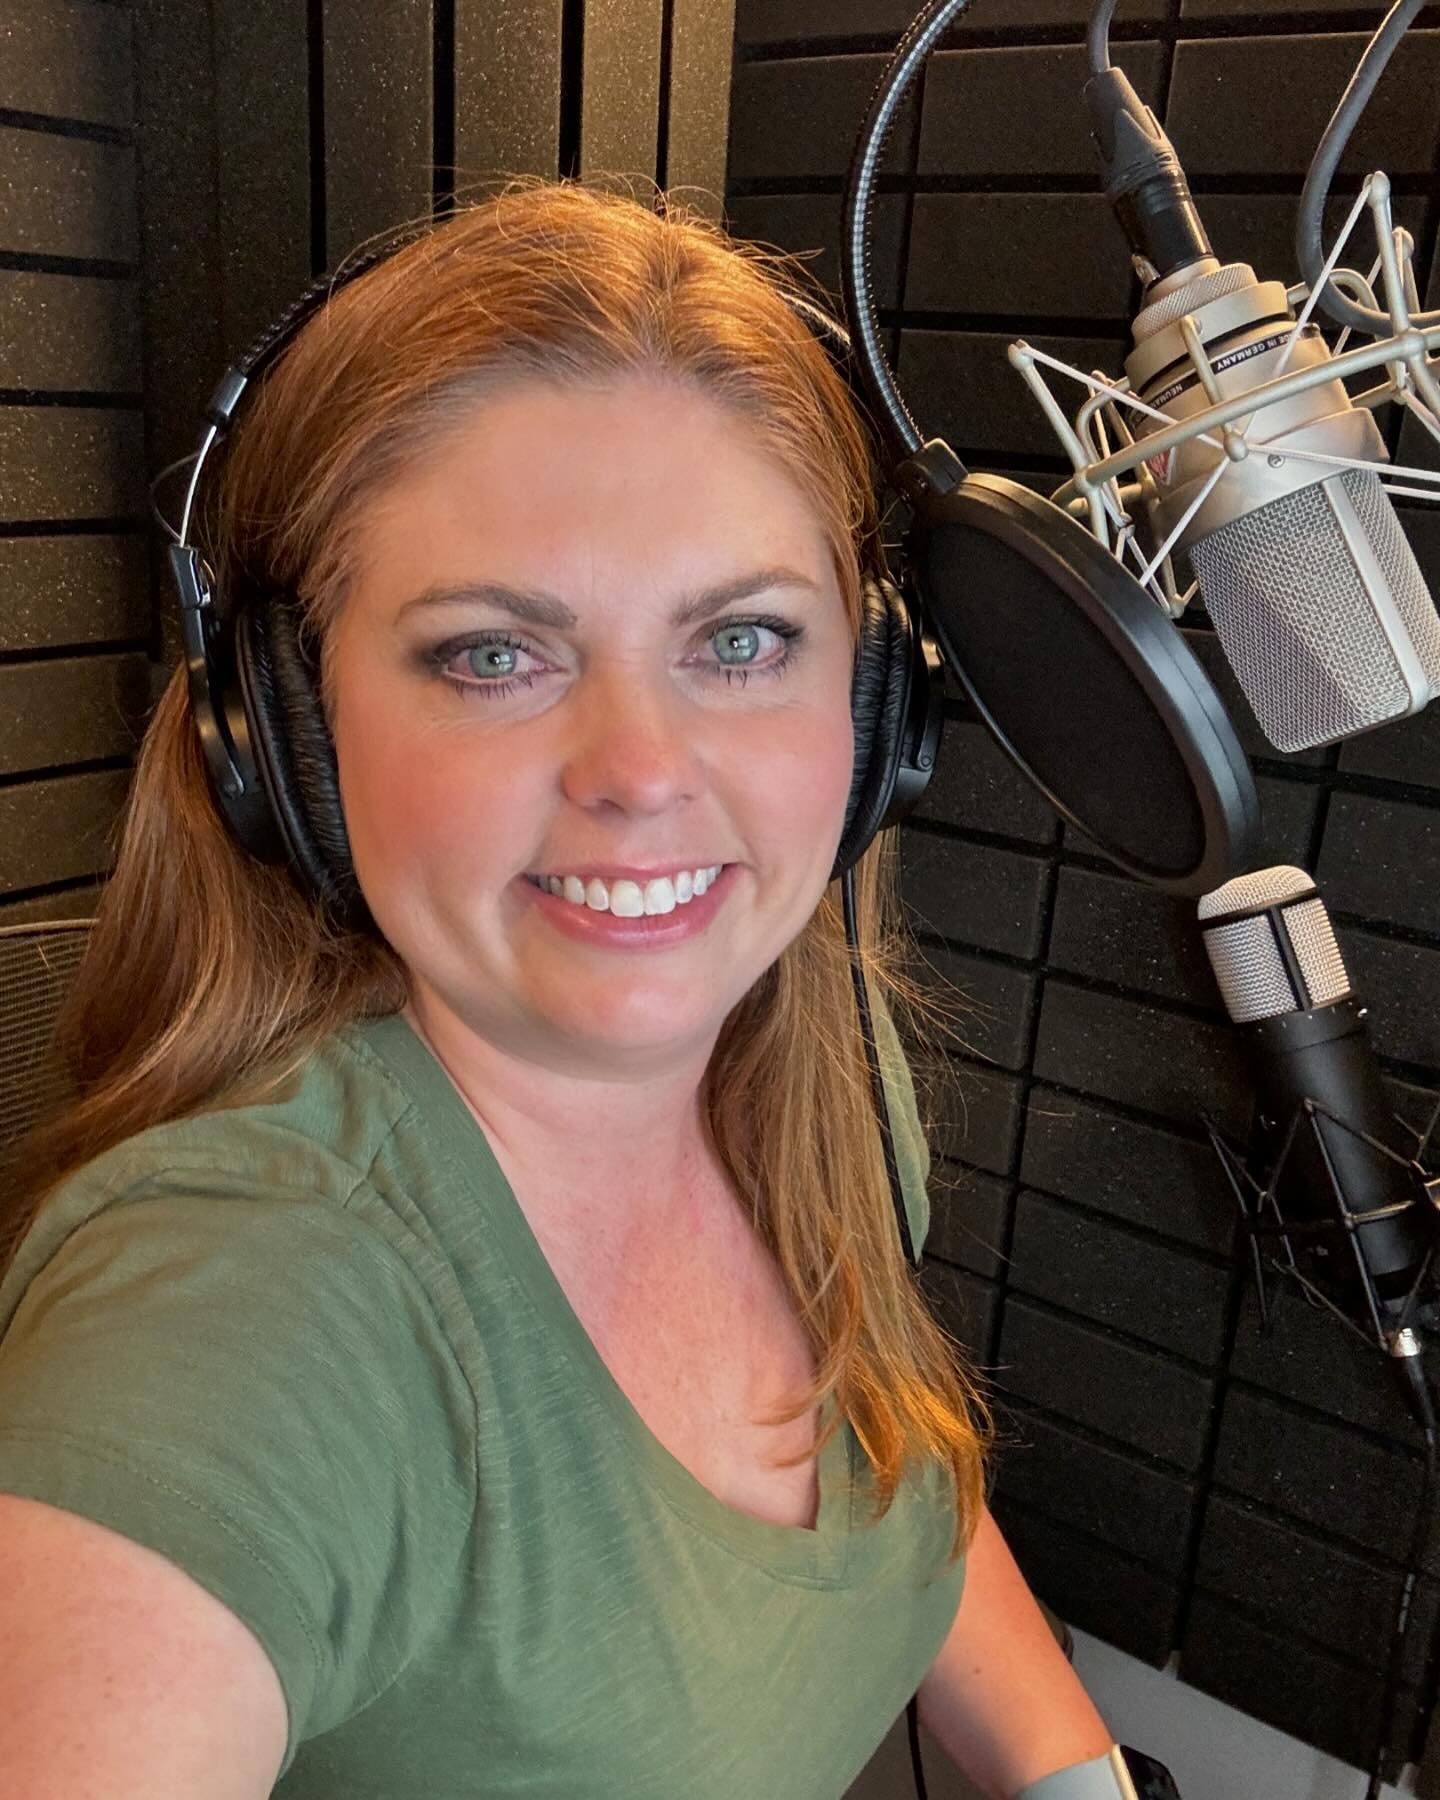 Spending the evening in the booth! First, as a student for a workshop, then as the teacher for my Business of VO class with @voice.masters ! #alwayslearning 
.
.
.
#voiceovers #voiceoverartist #voiceoveractor #voiceactor #voiceoverlife #voiceoverwork